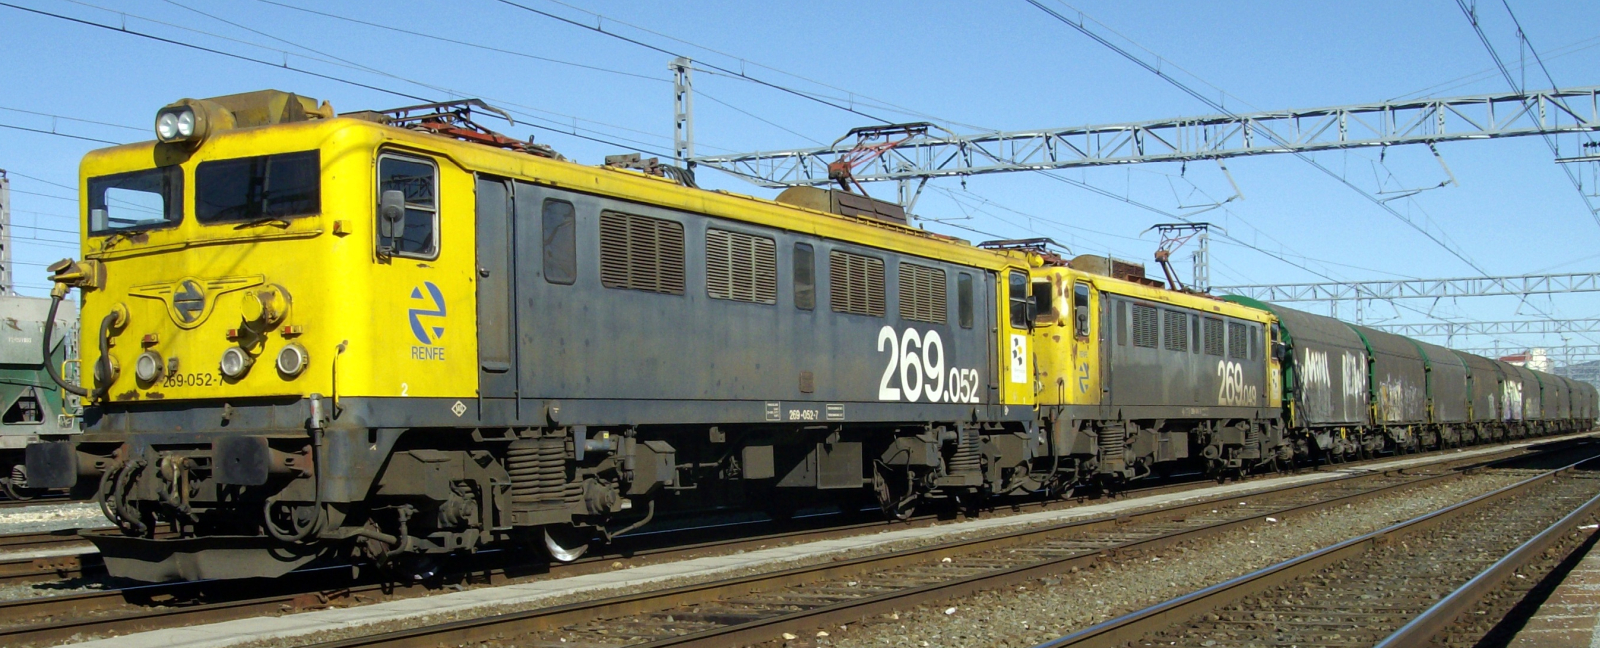 269.052 and 269.049 in February 2009 in front of a freight train